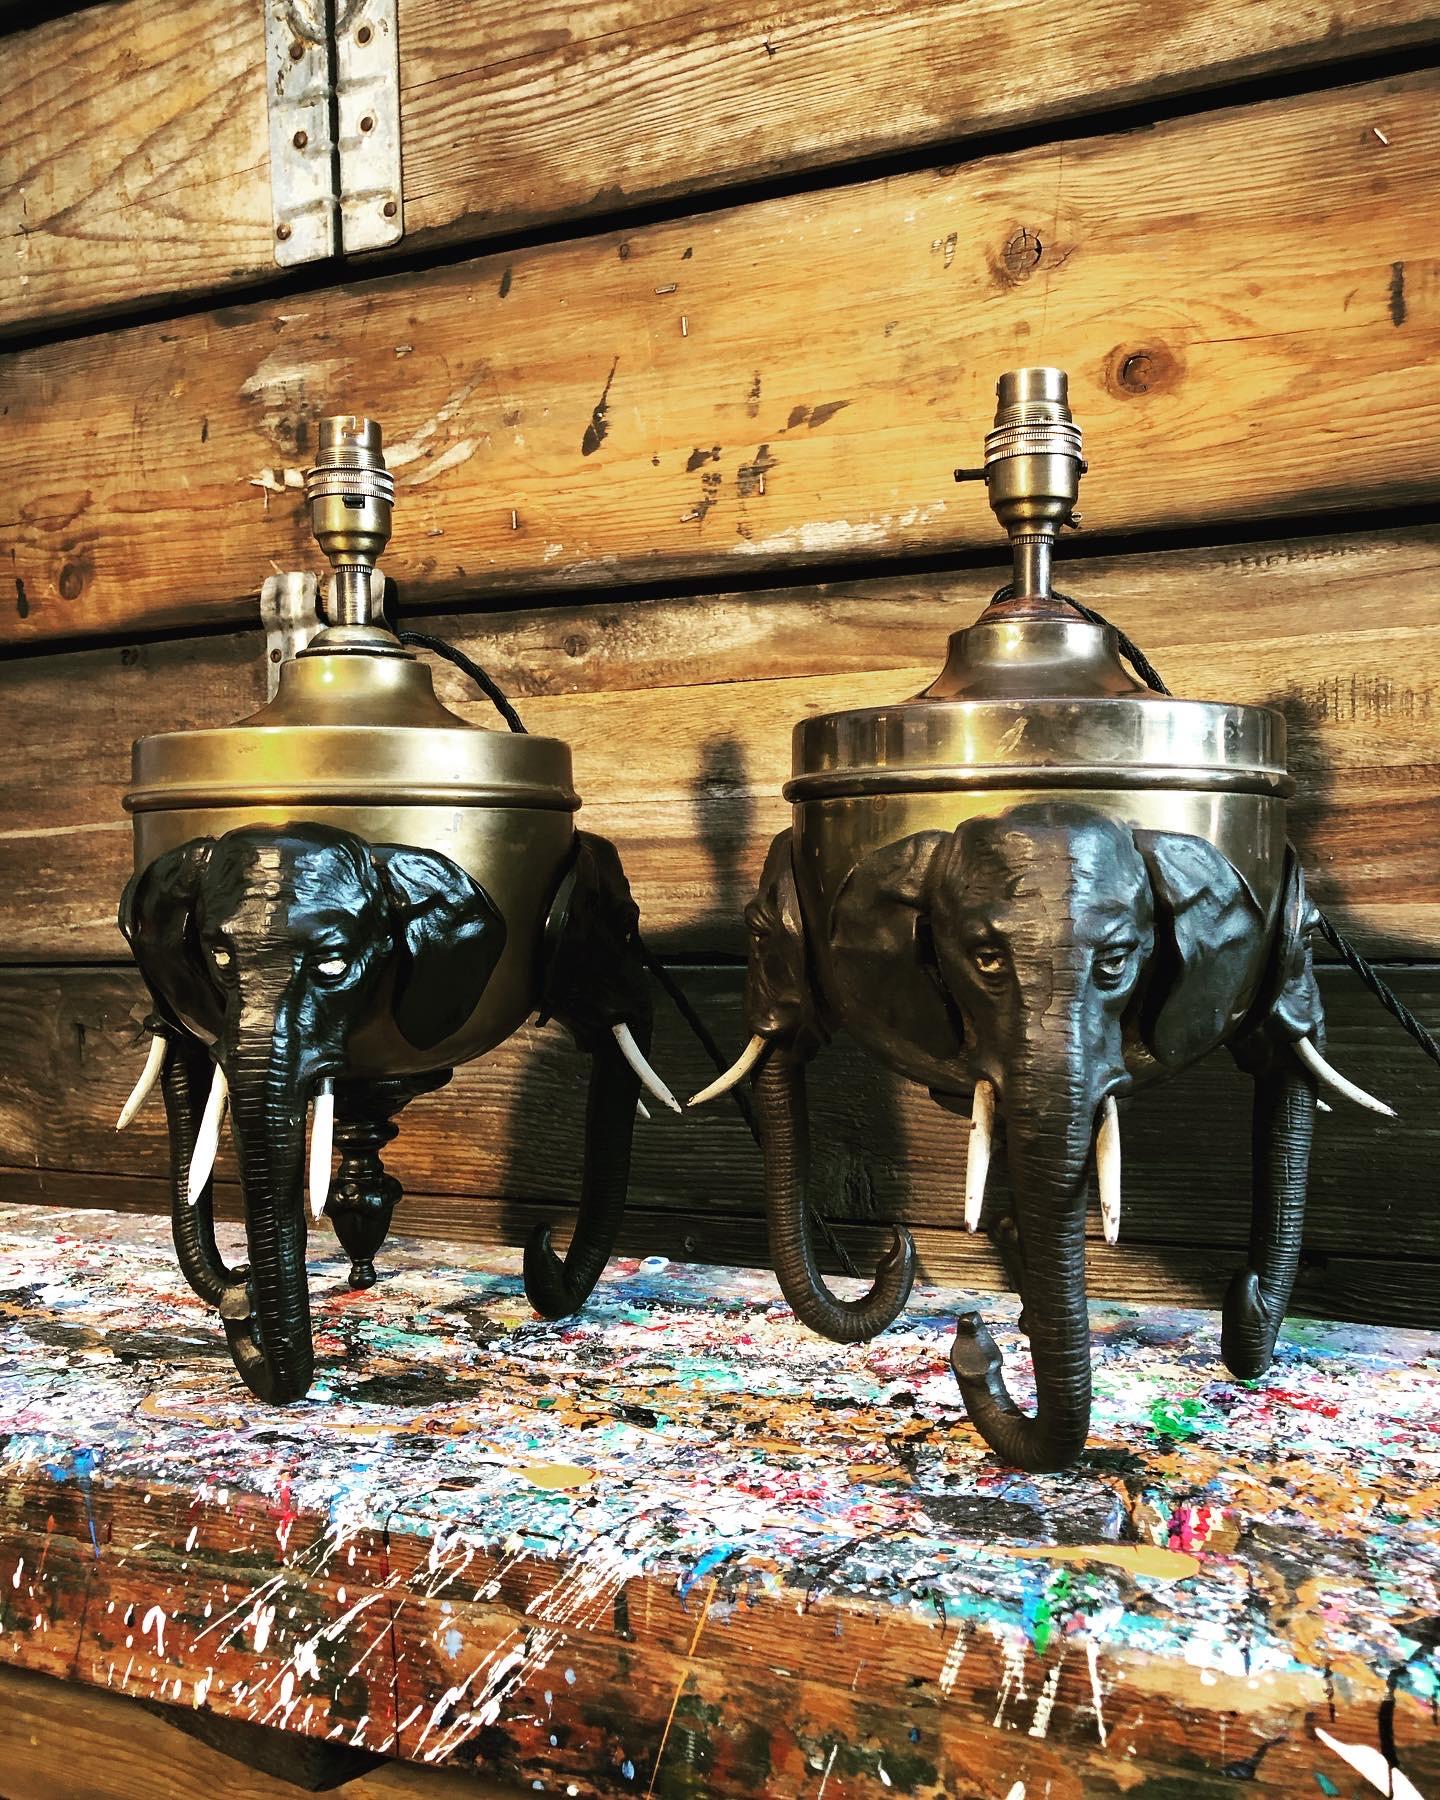 A pair of rare antique elephant lamps from the late 19th century.
Raised on 3 elephant heads.
Original cold painted bronze with a great patina and look to the surface.
Converted and electrified with brass B22 lamp holders black twisted cloth flex